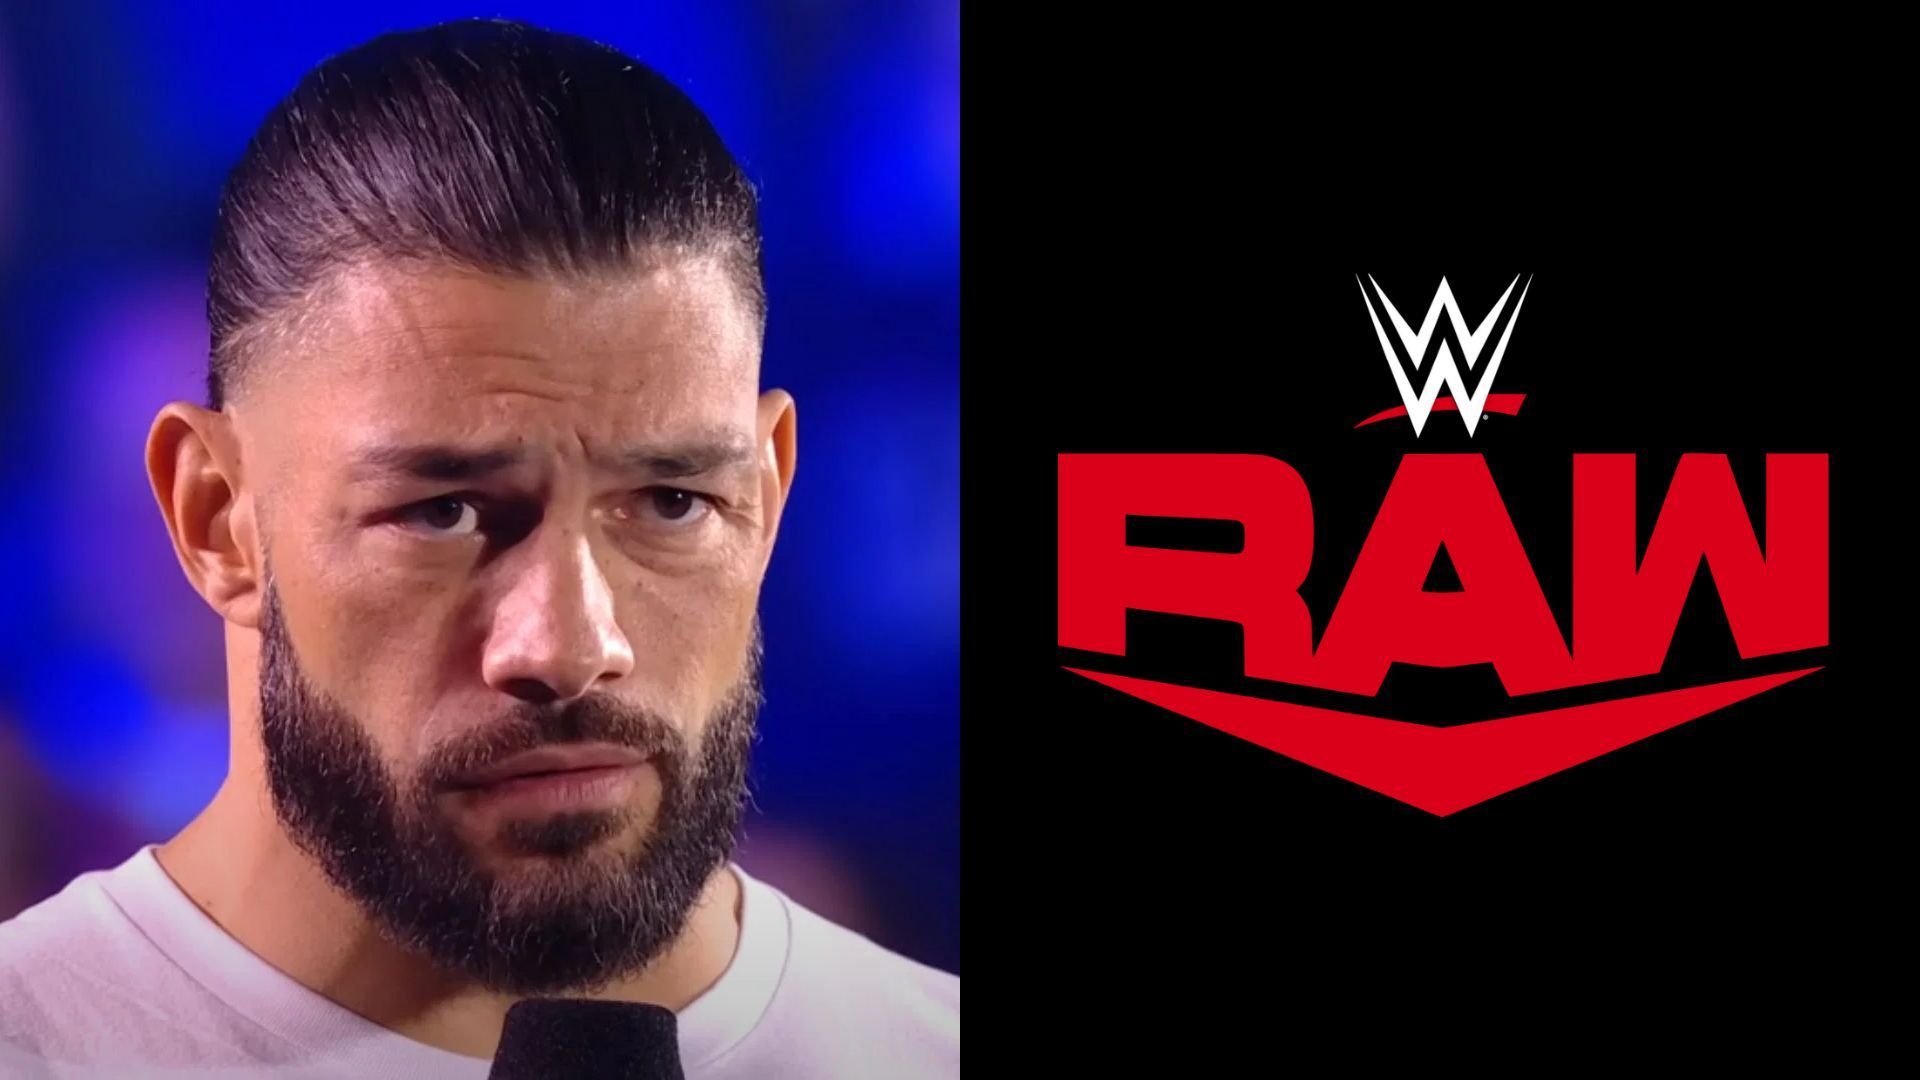 Roman Reigns was selected by SmackDown in the 2023 WWE Draft